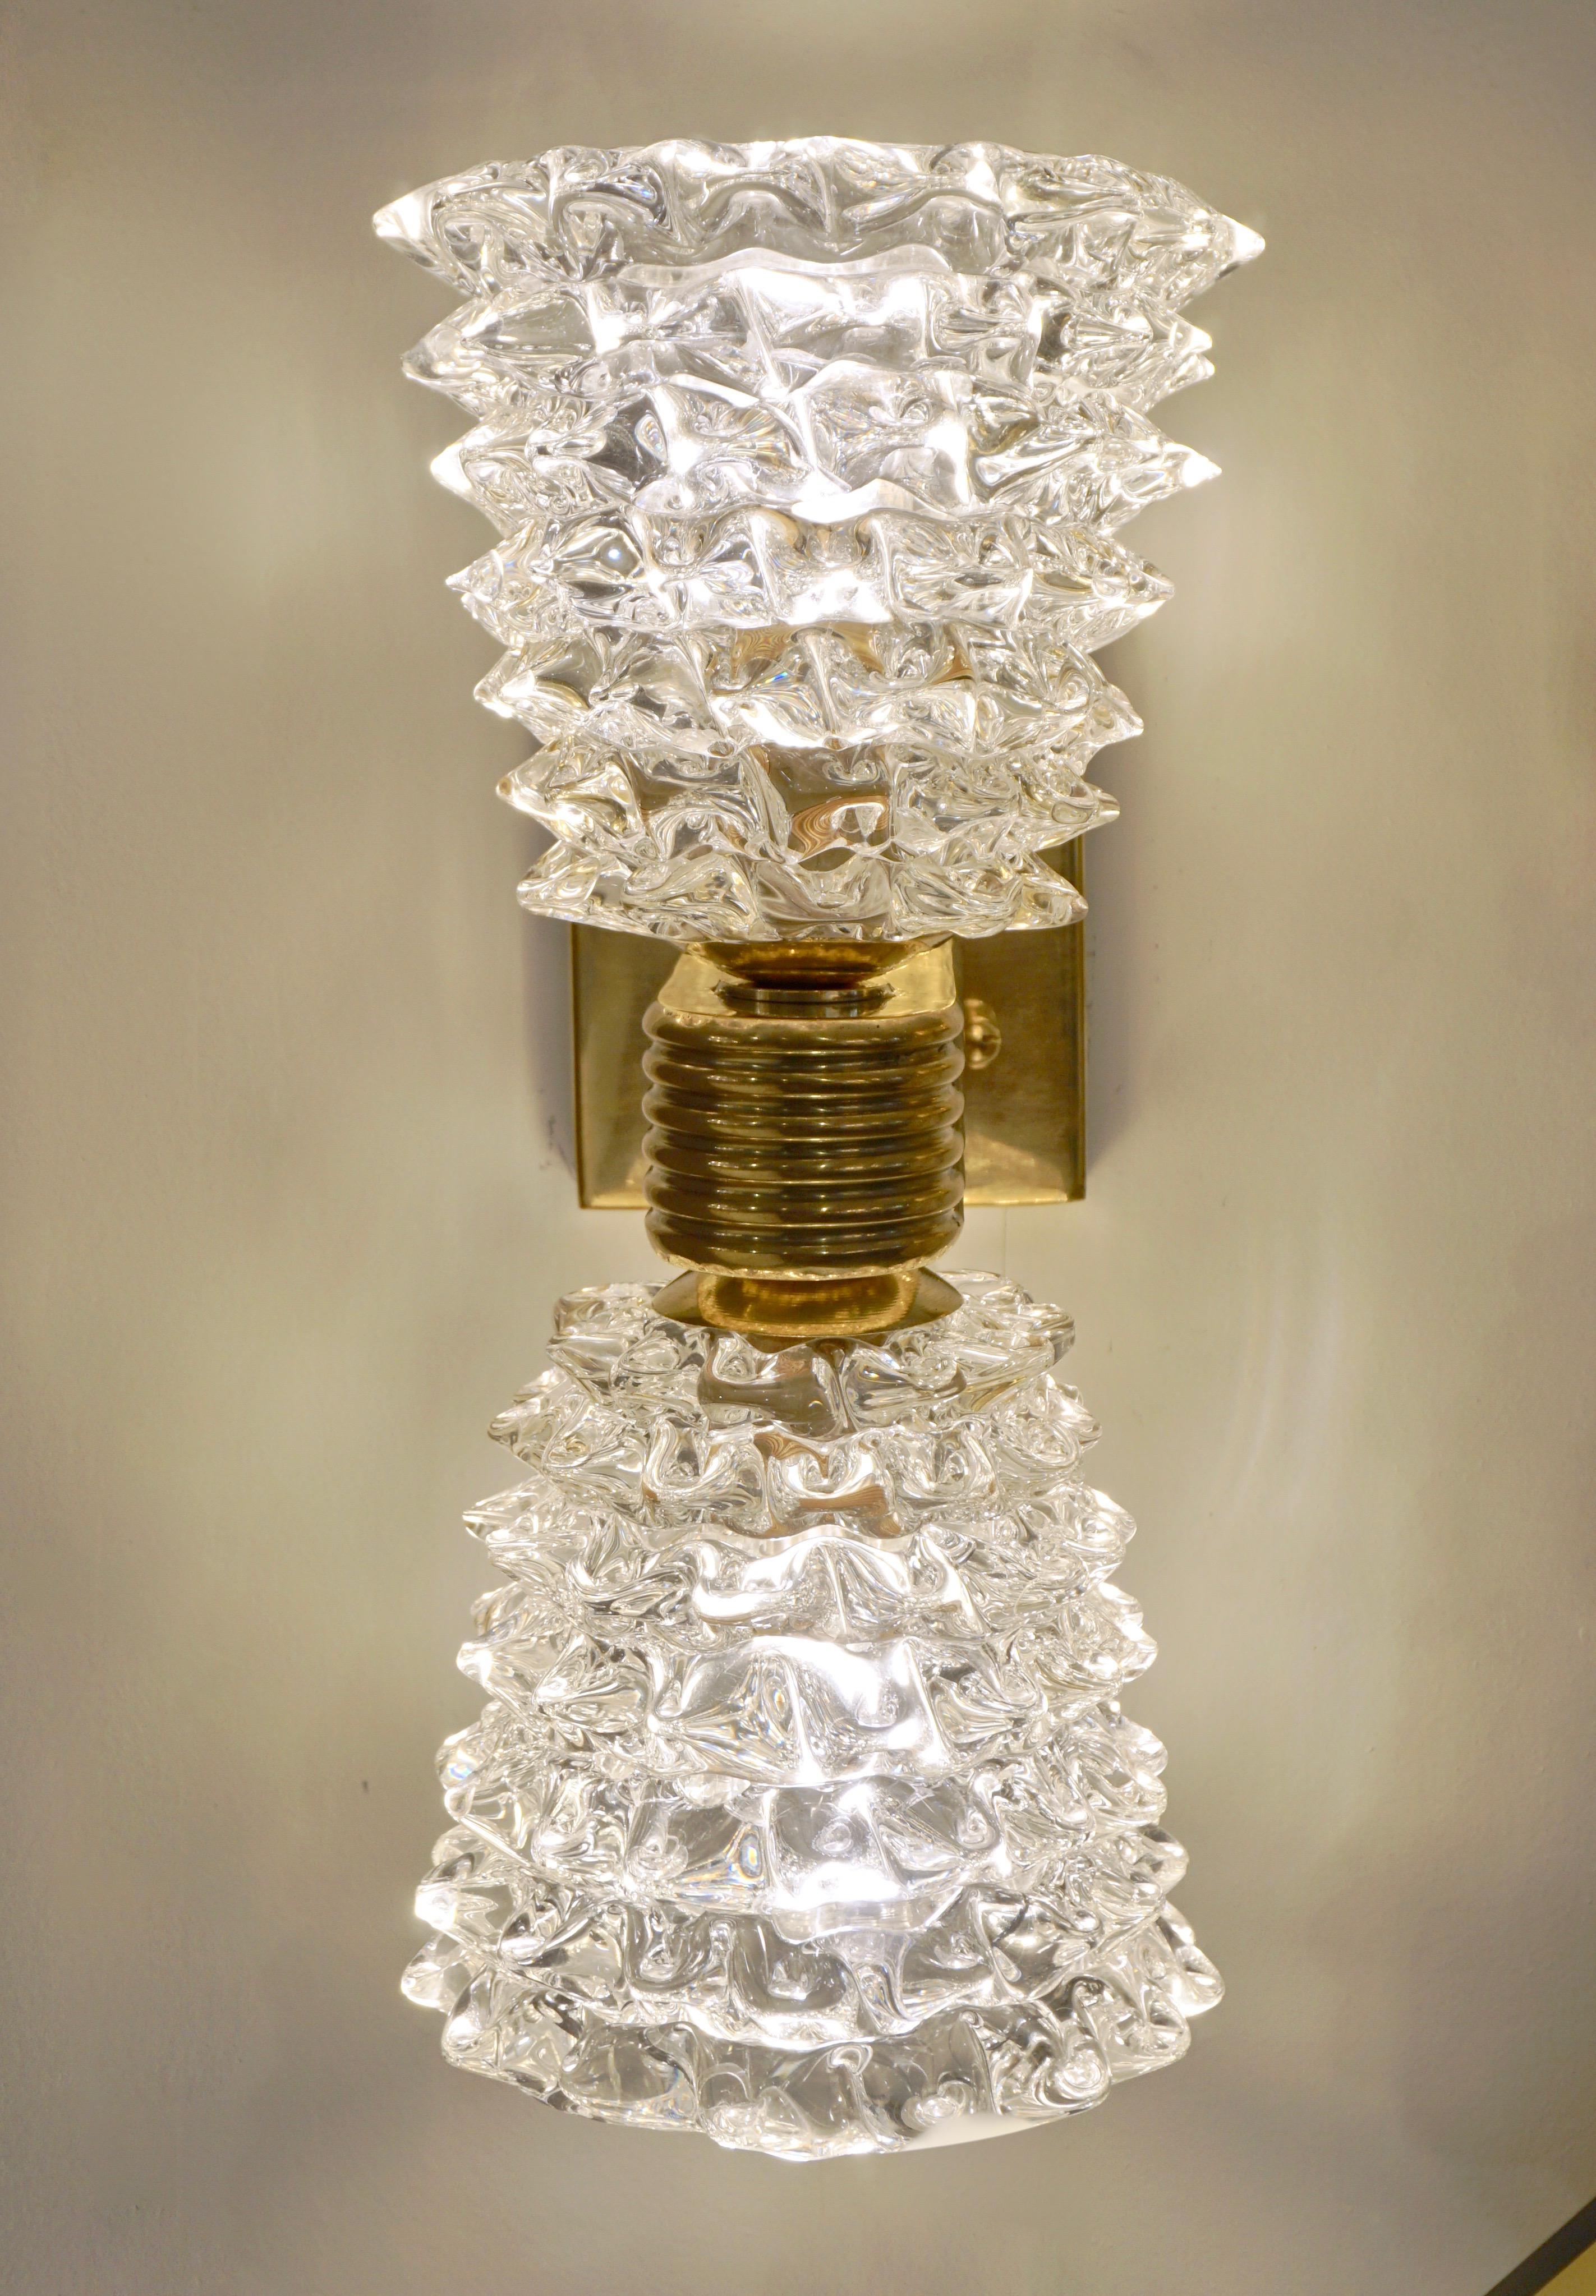 Organic sculpture modern crystal clear Murano glass wall light in the Art Deco style of Barovier Toso, entirely handcrafted in Italy, with double cone shape shades providing upward and downward light source, made using the rostrato technique that